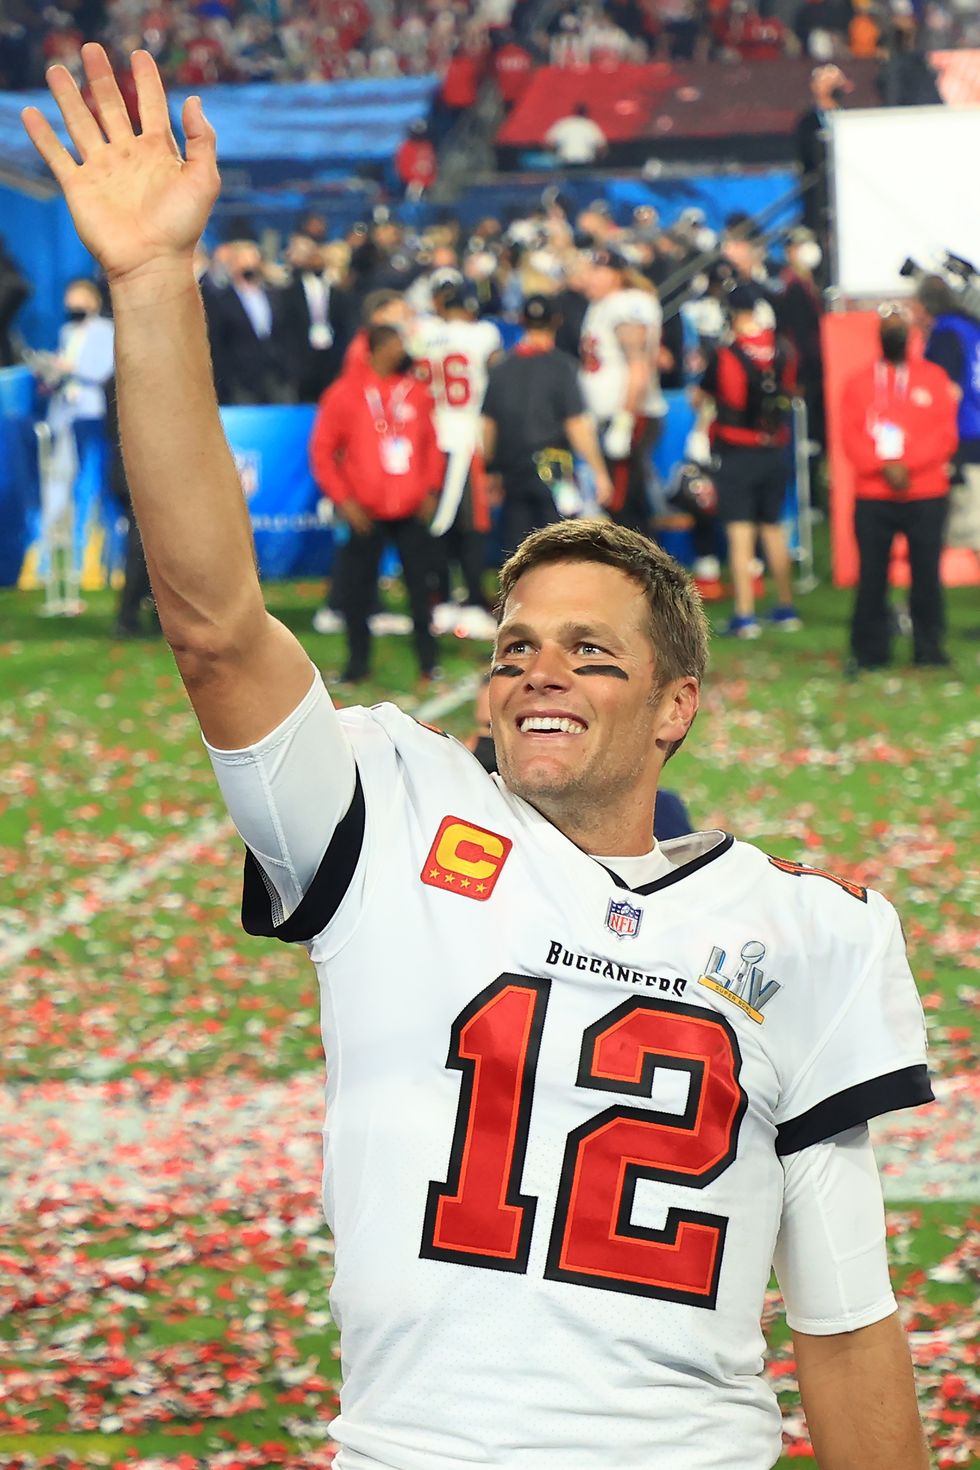 tampa, florida   february 07 tom brady 12 of the tampa bay buccaneers signals after winning super bowl lv at raymond james stadium on february 07, 2021 in tampa, florida photo by mike ehrmanngetty images